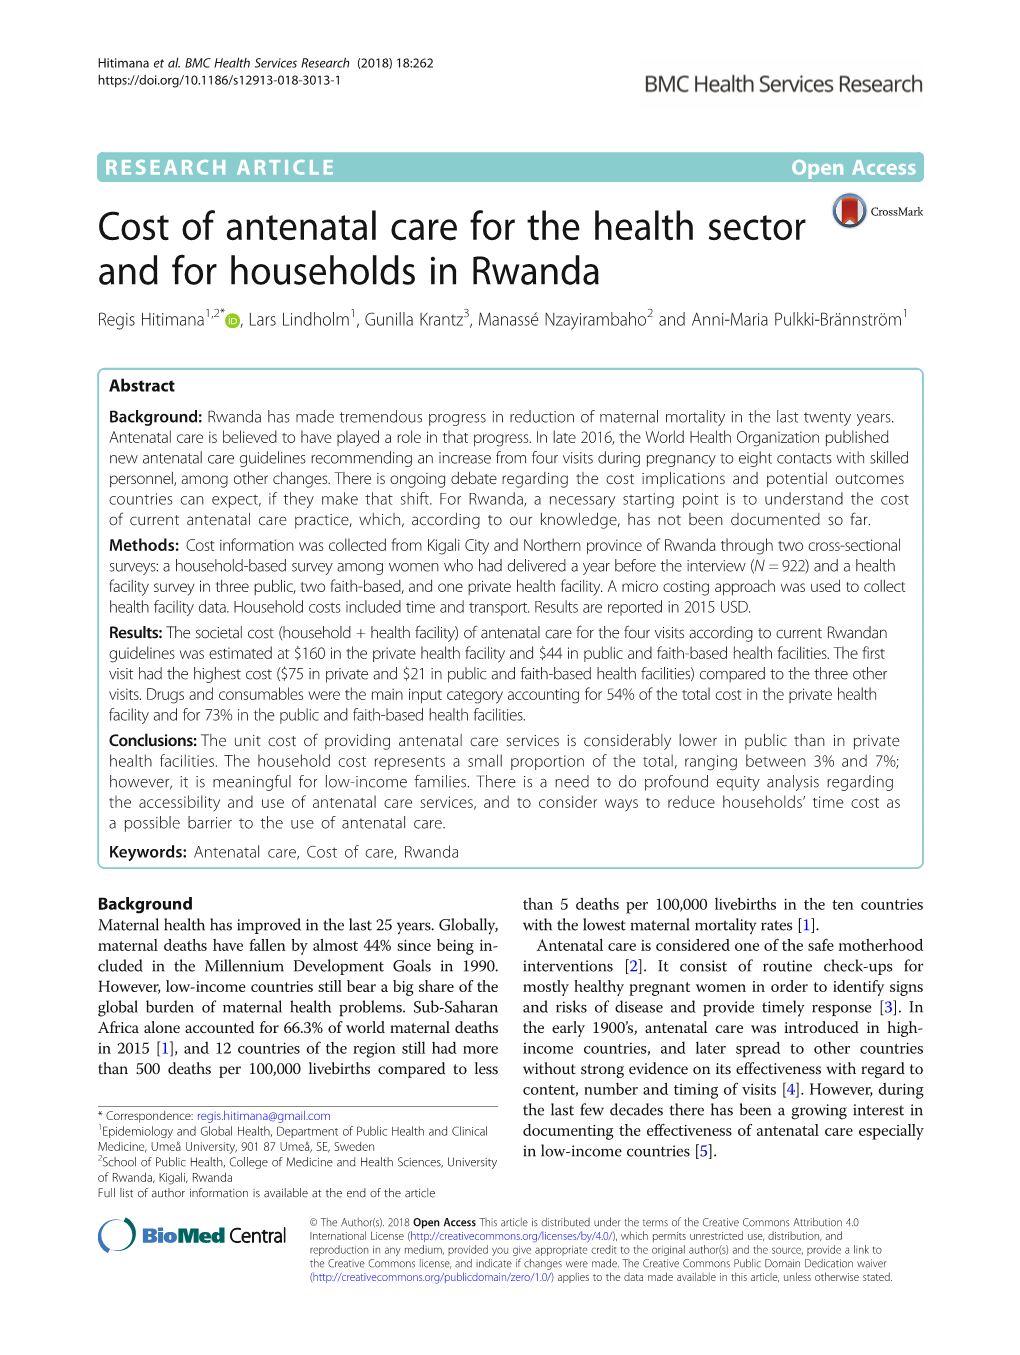 Cost of Antenatal Care for the Health Sector and for Households in Rwanda